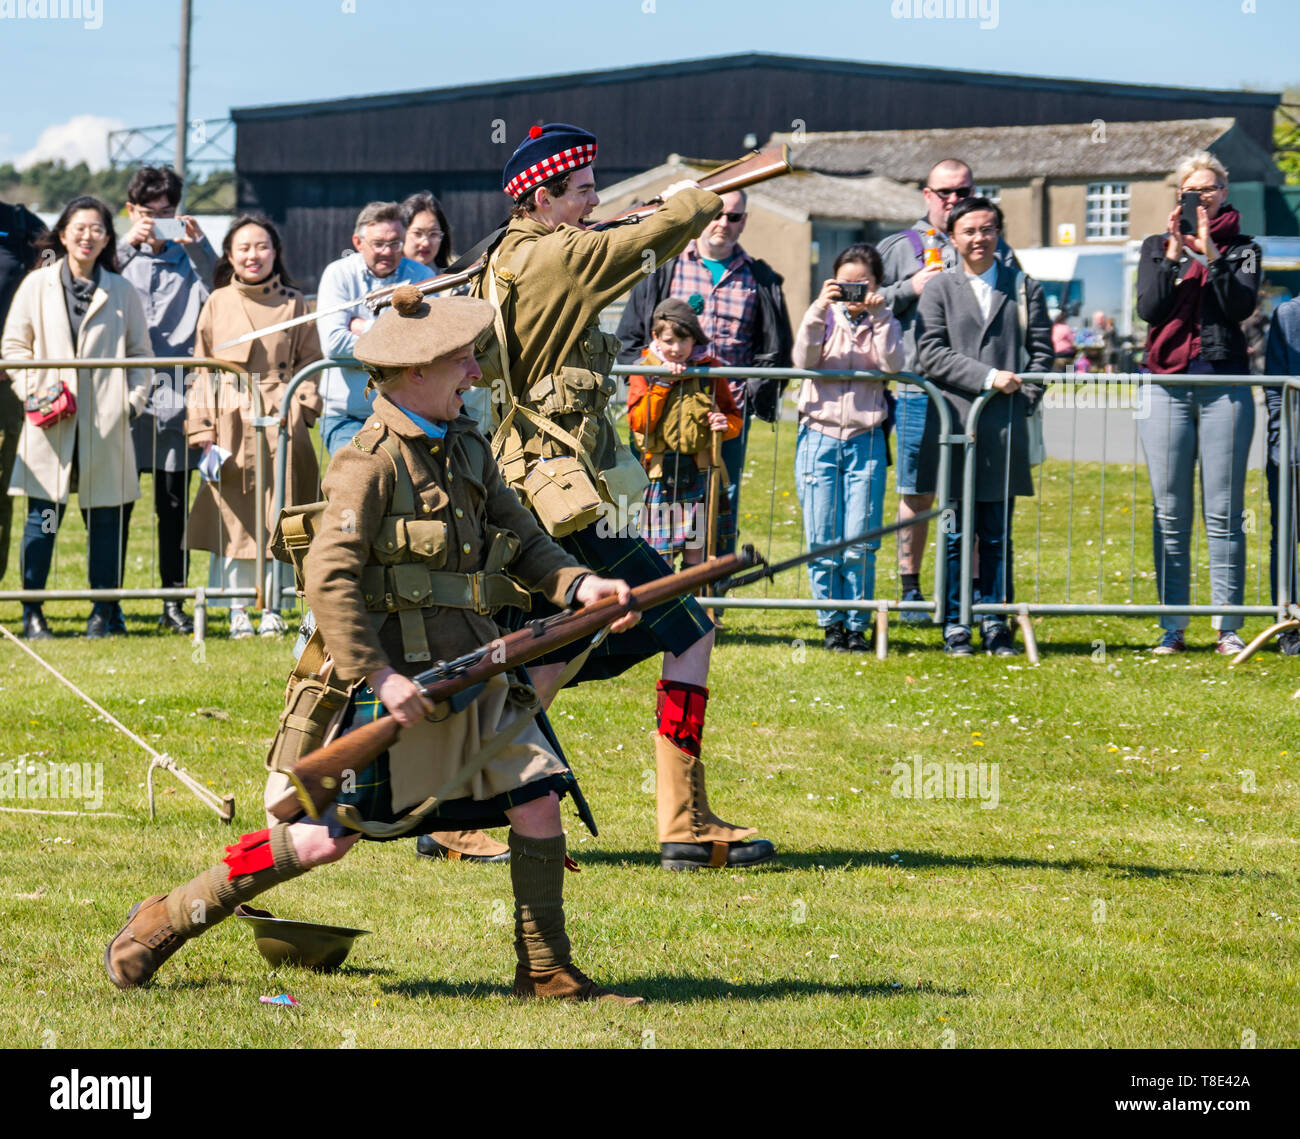 Museum of Flight, East Fortune, East Lothian, Scotland, UK 12th May, 2019. Wartime Experience: A family day out with all things related to the World Wars including an infantry display by Gordon Highlanders history group about military ordnance and firearms Stock Photo